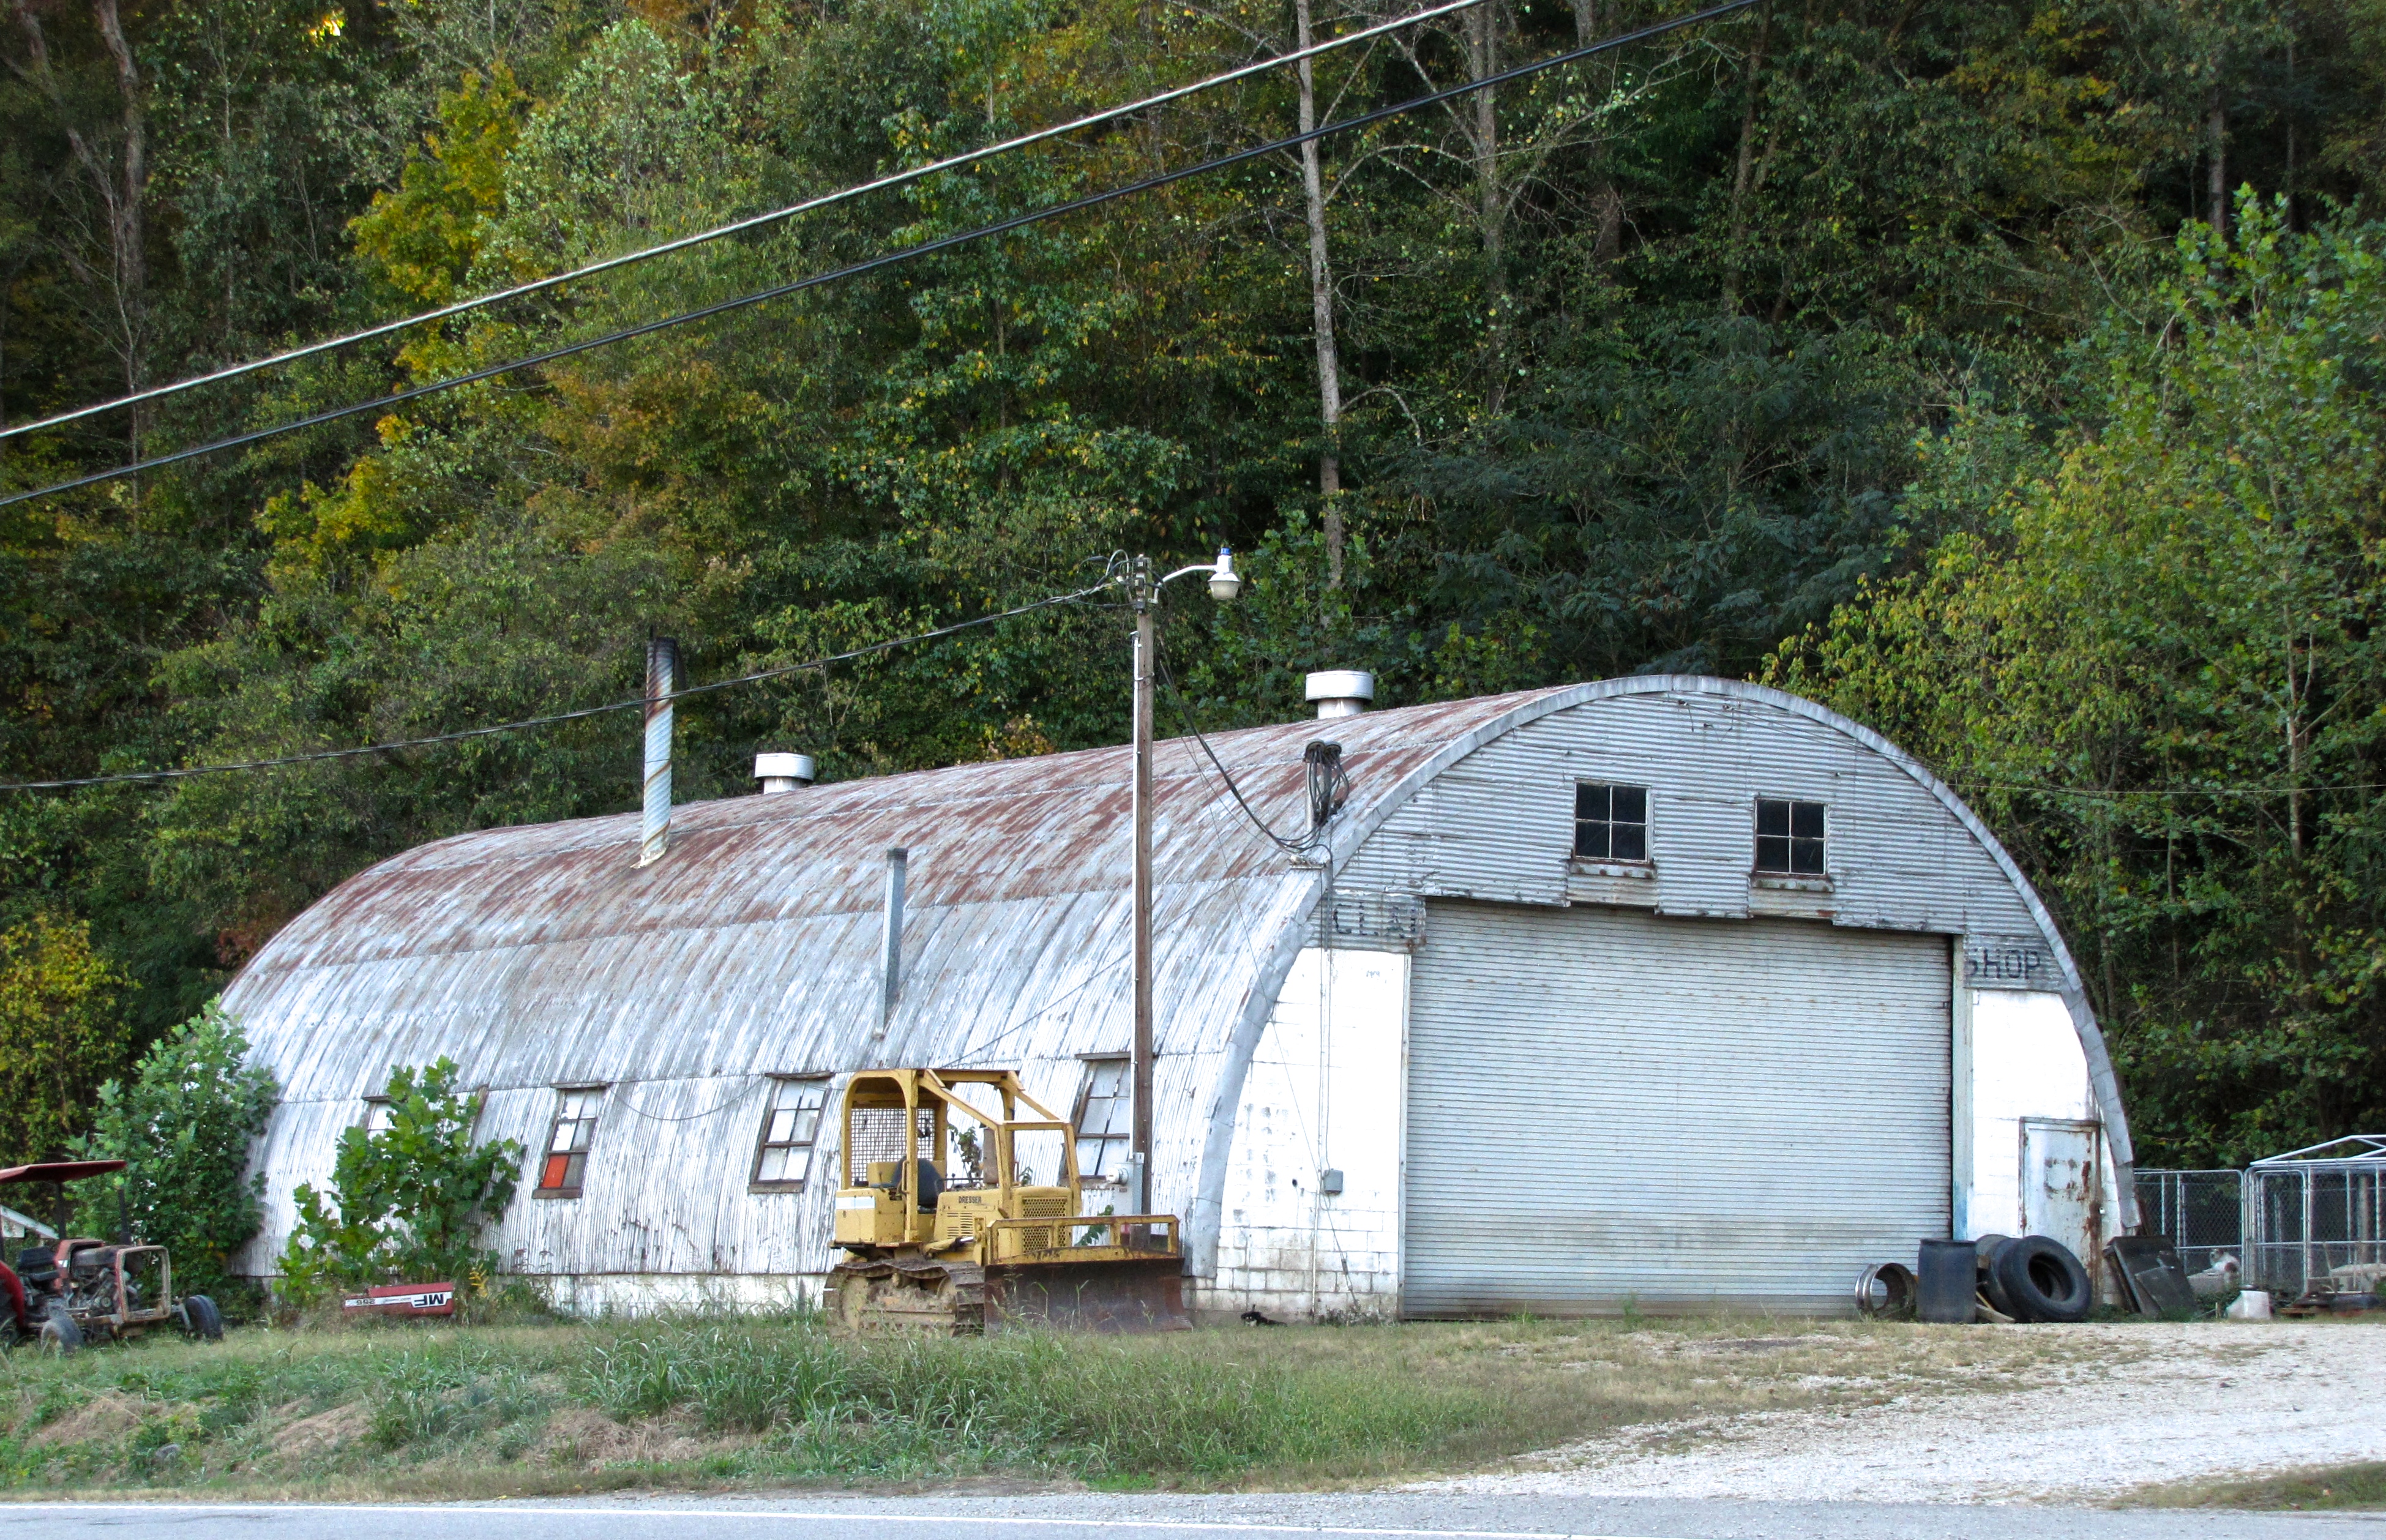 quonset hut in Windham, NH